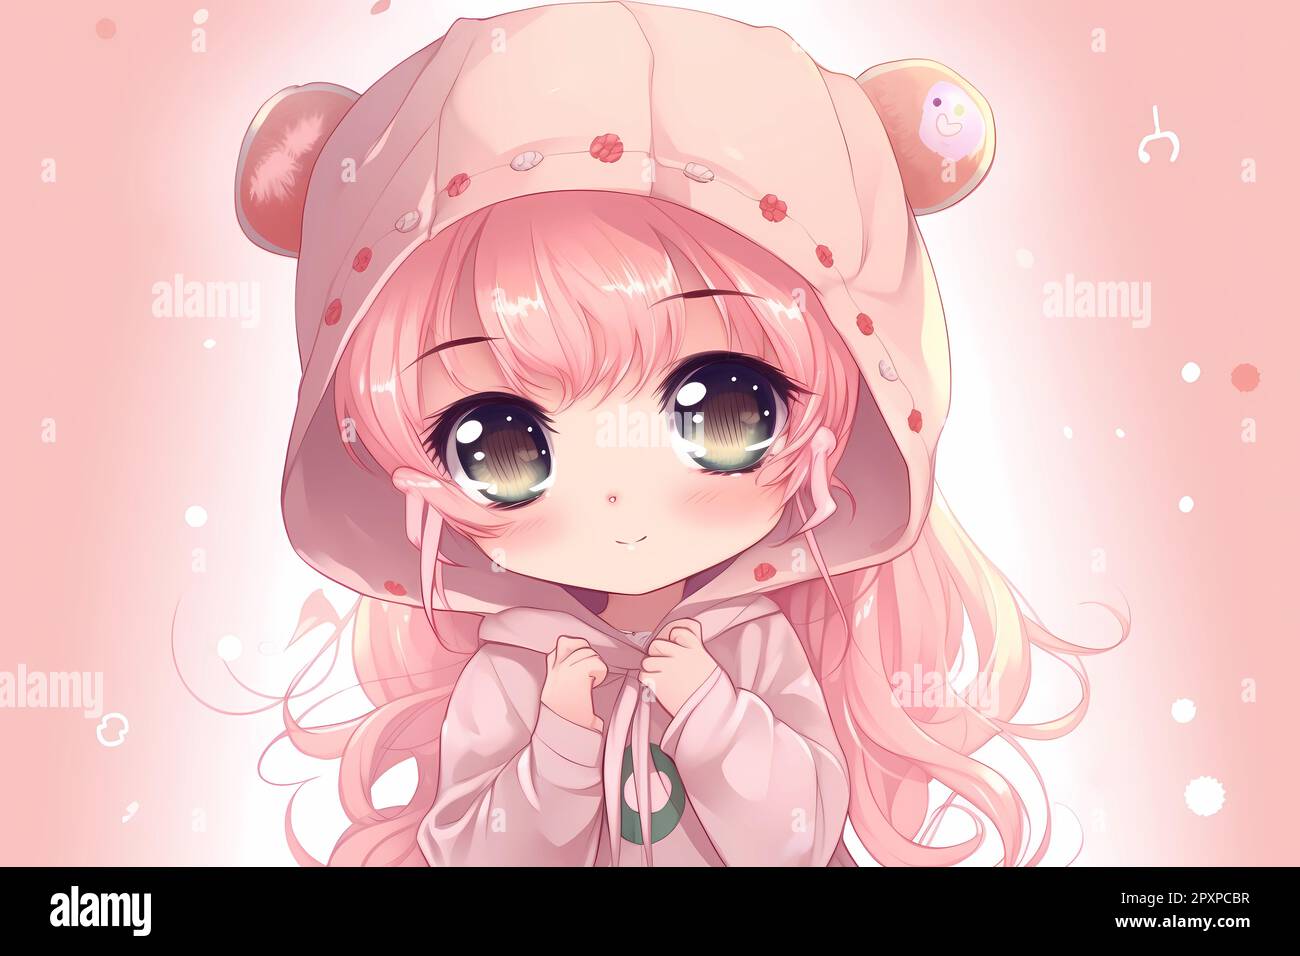 Anime Girl With A Pink Hat And Pink Hat Stock Photo - Alamy